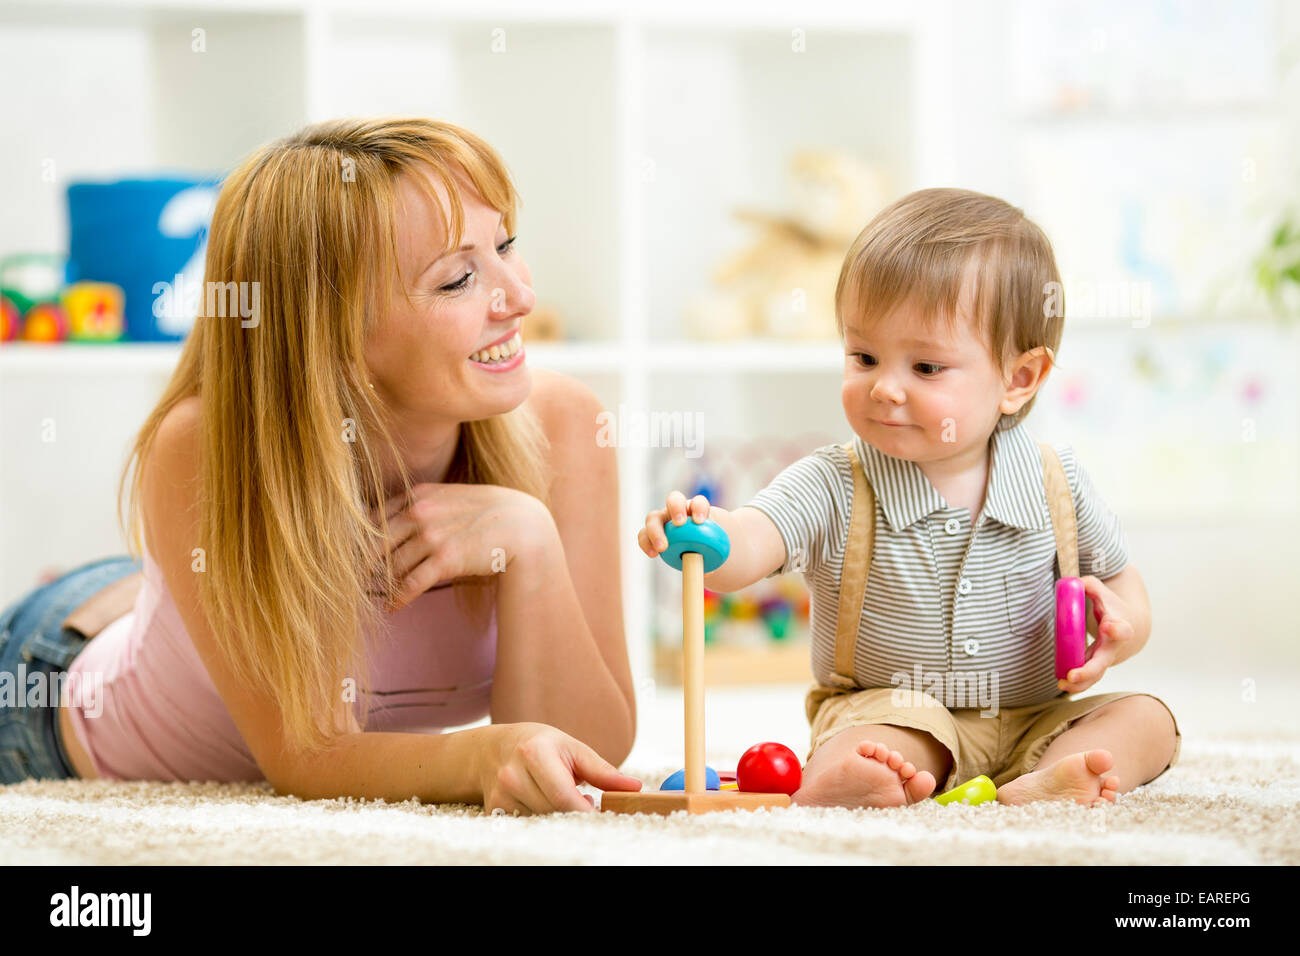 cute woman and kid playing together indoor Stock Photo